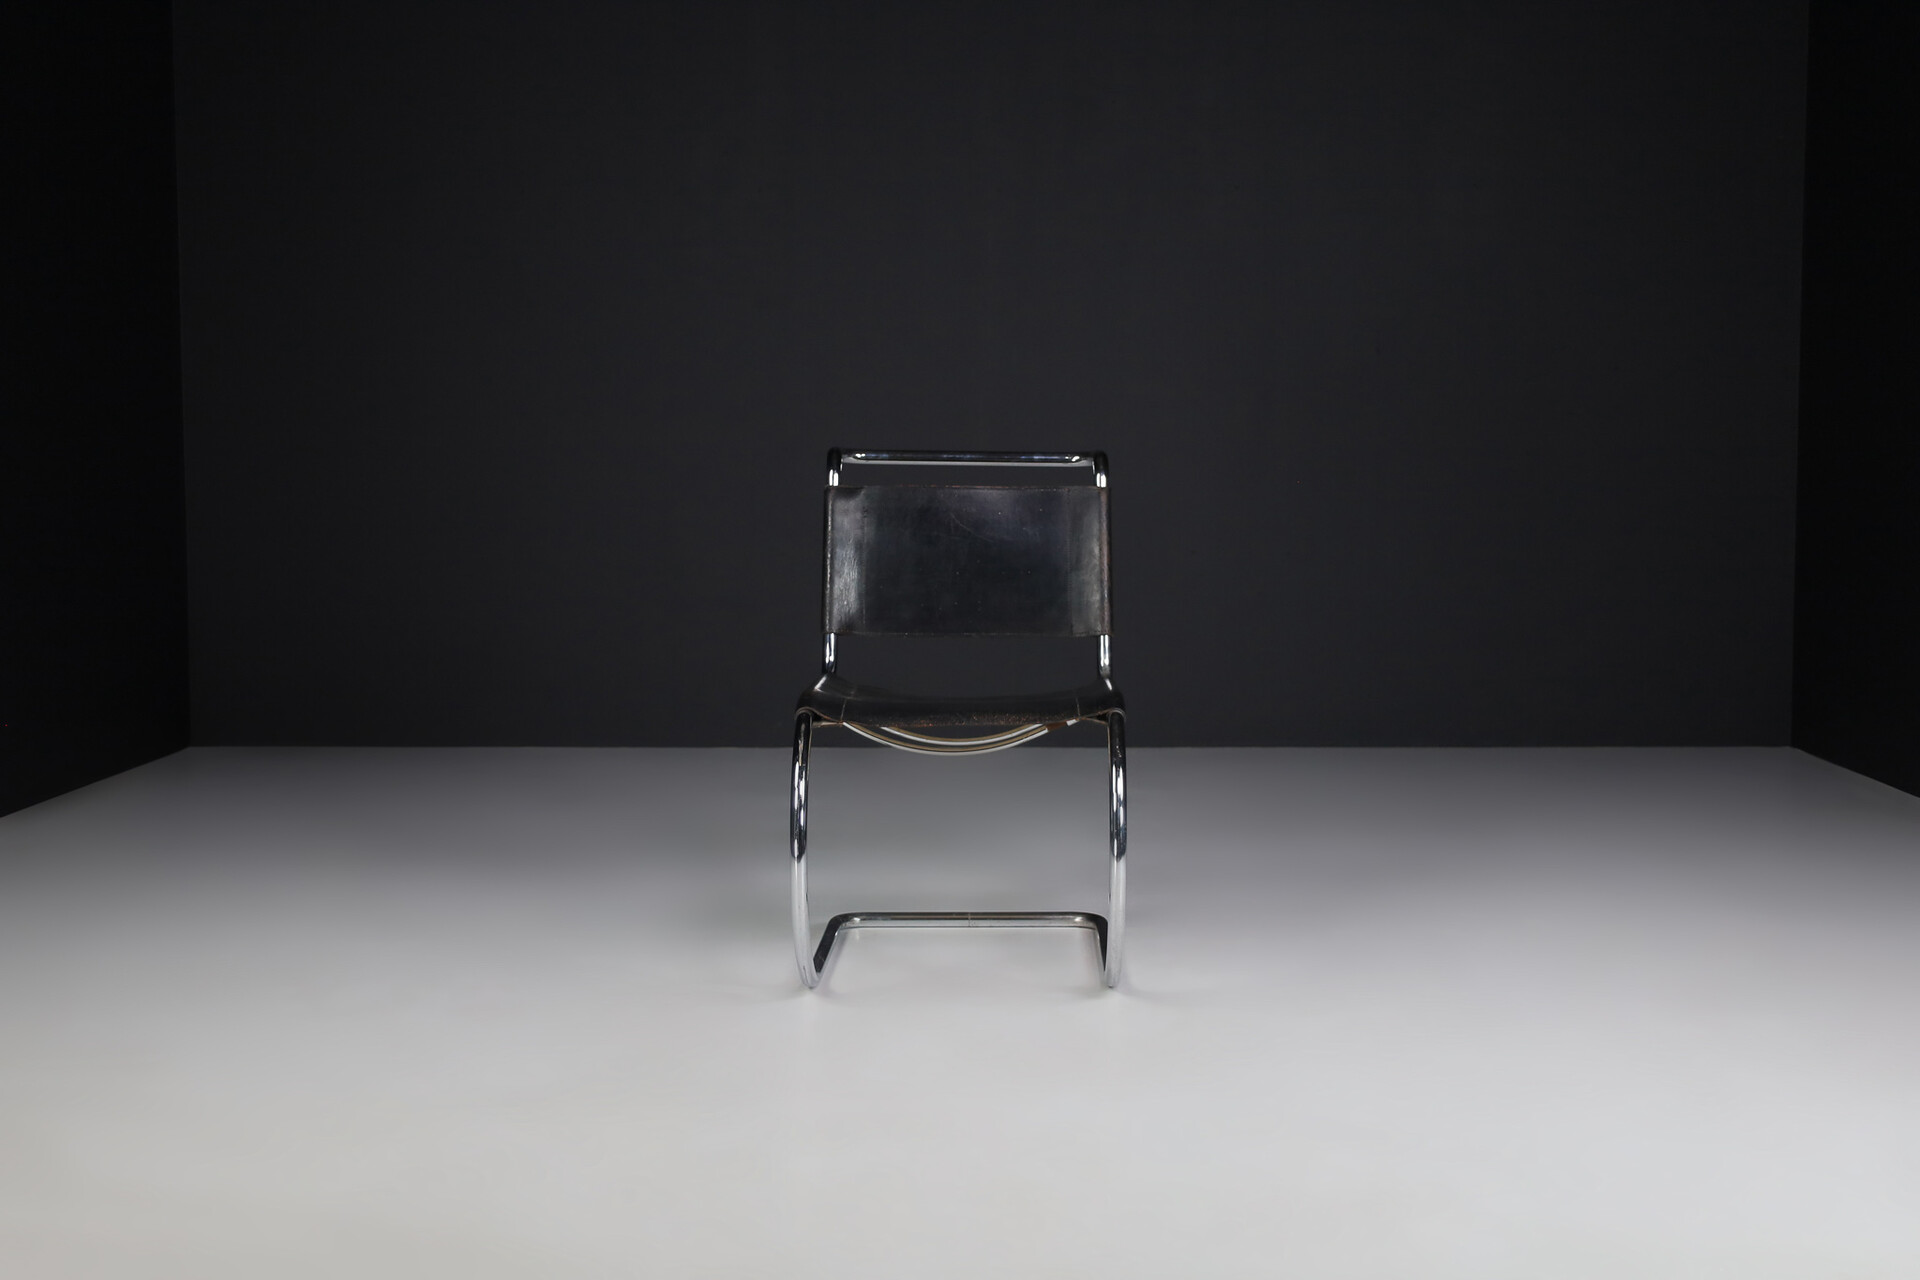 Bauhaus MR10 Cantilever Chair by Ludwig Mies van der Rohe Germany 1950s Mid-20th century